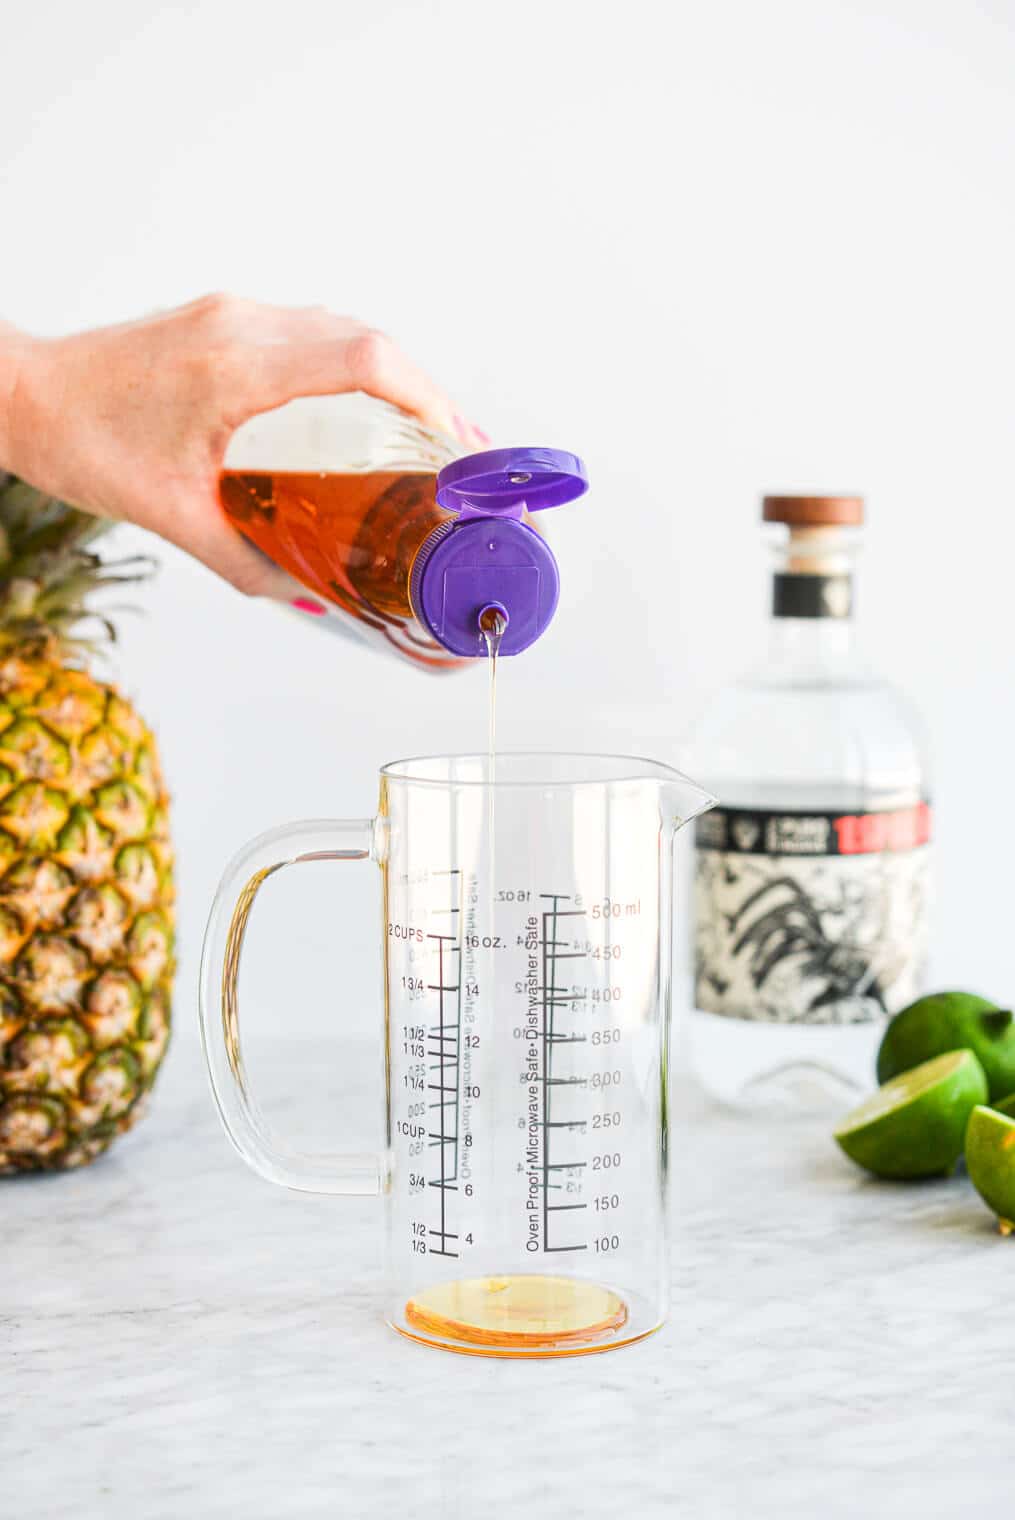 a person squeezing agave nectar into a large glass measuring cup